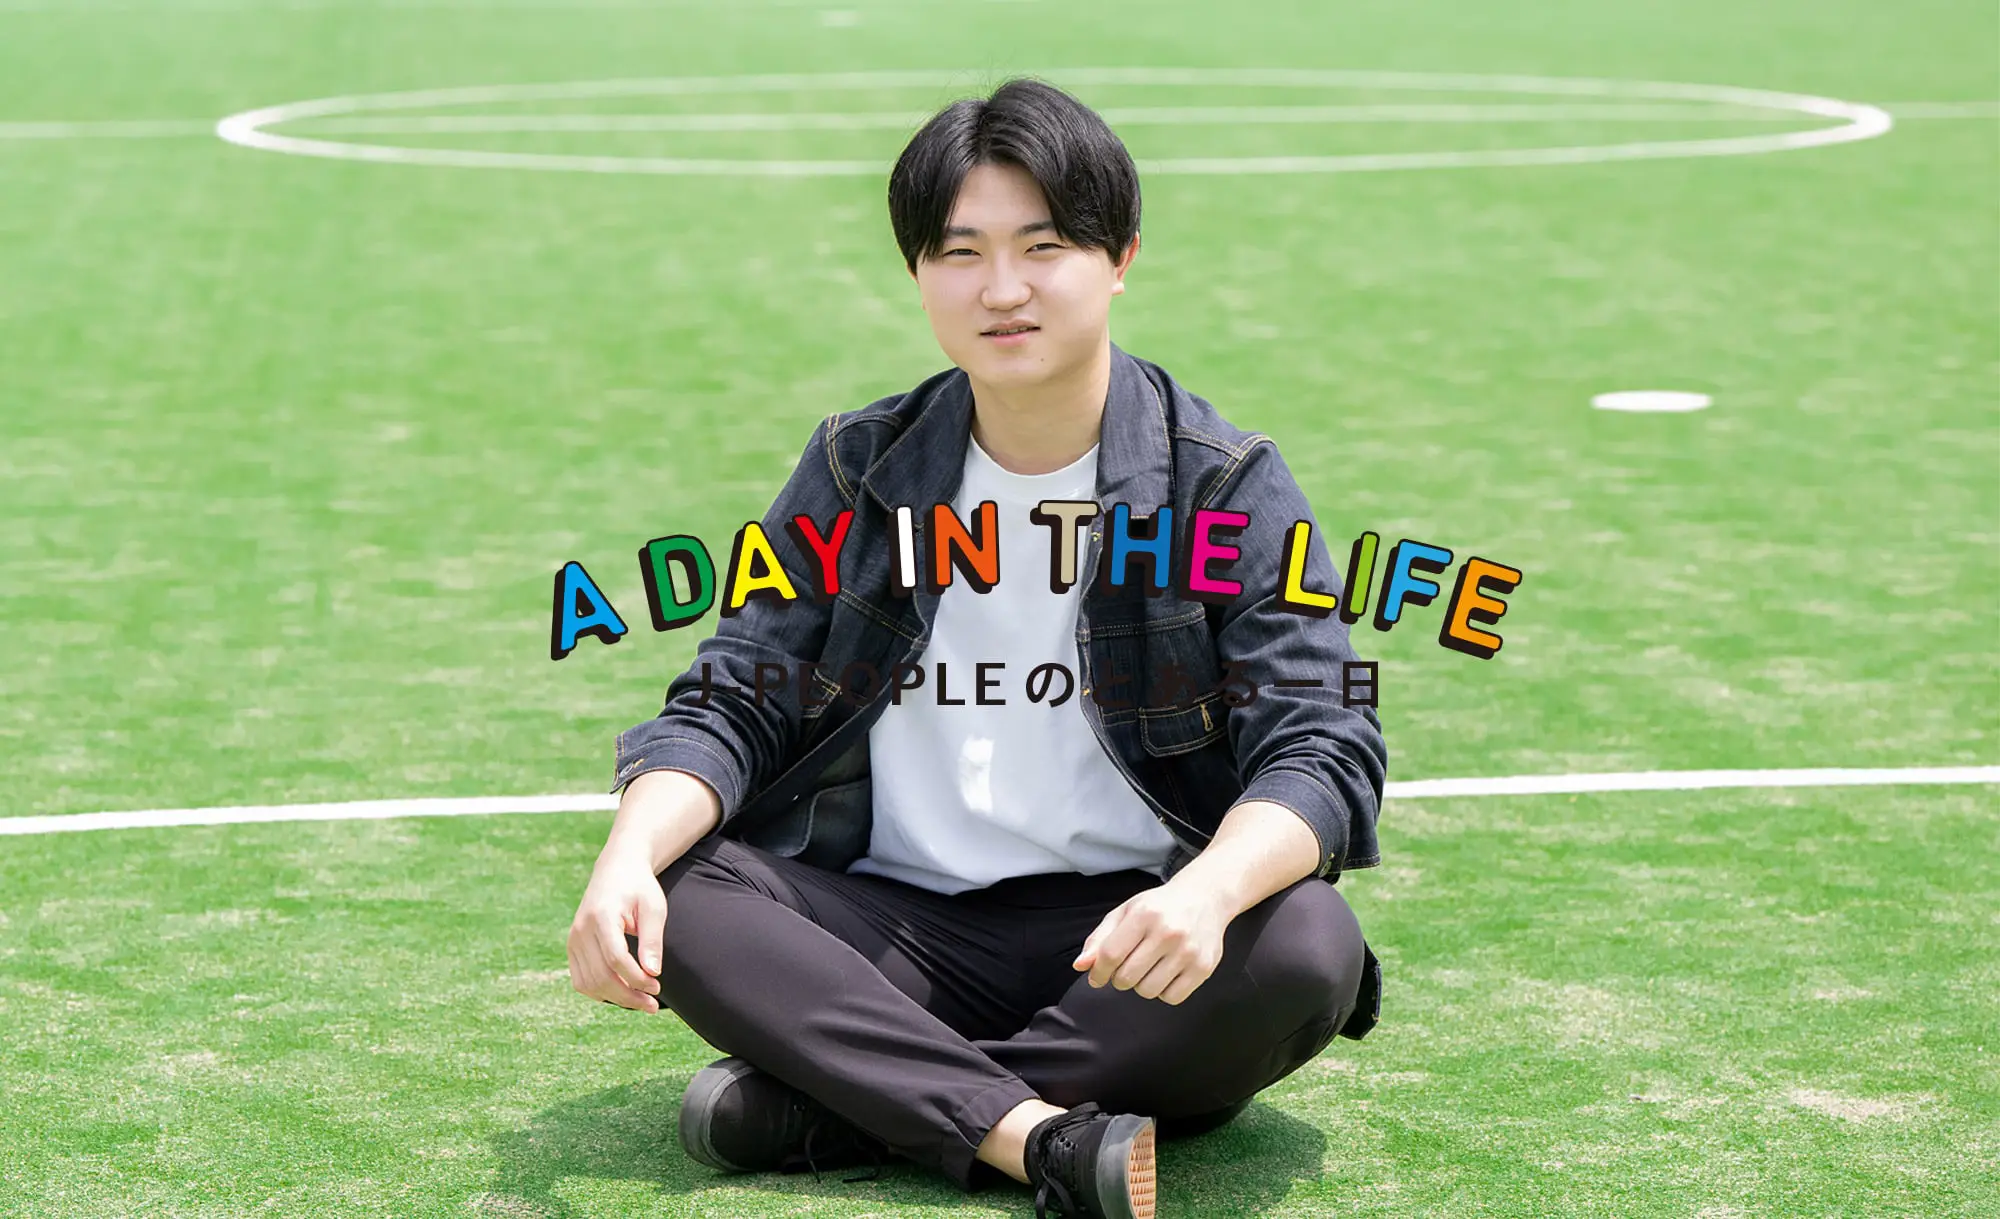 A DAY IN THE LIFE J-PEOPLEのとある一日